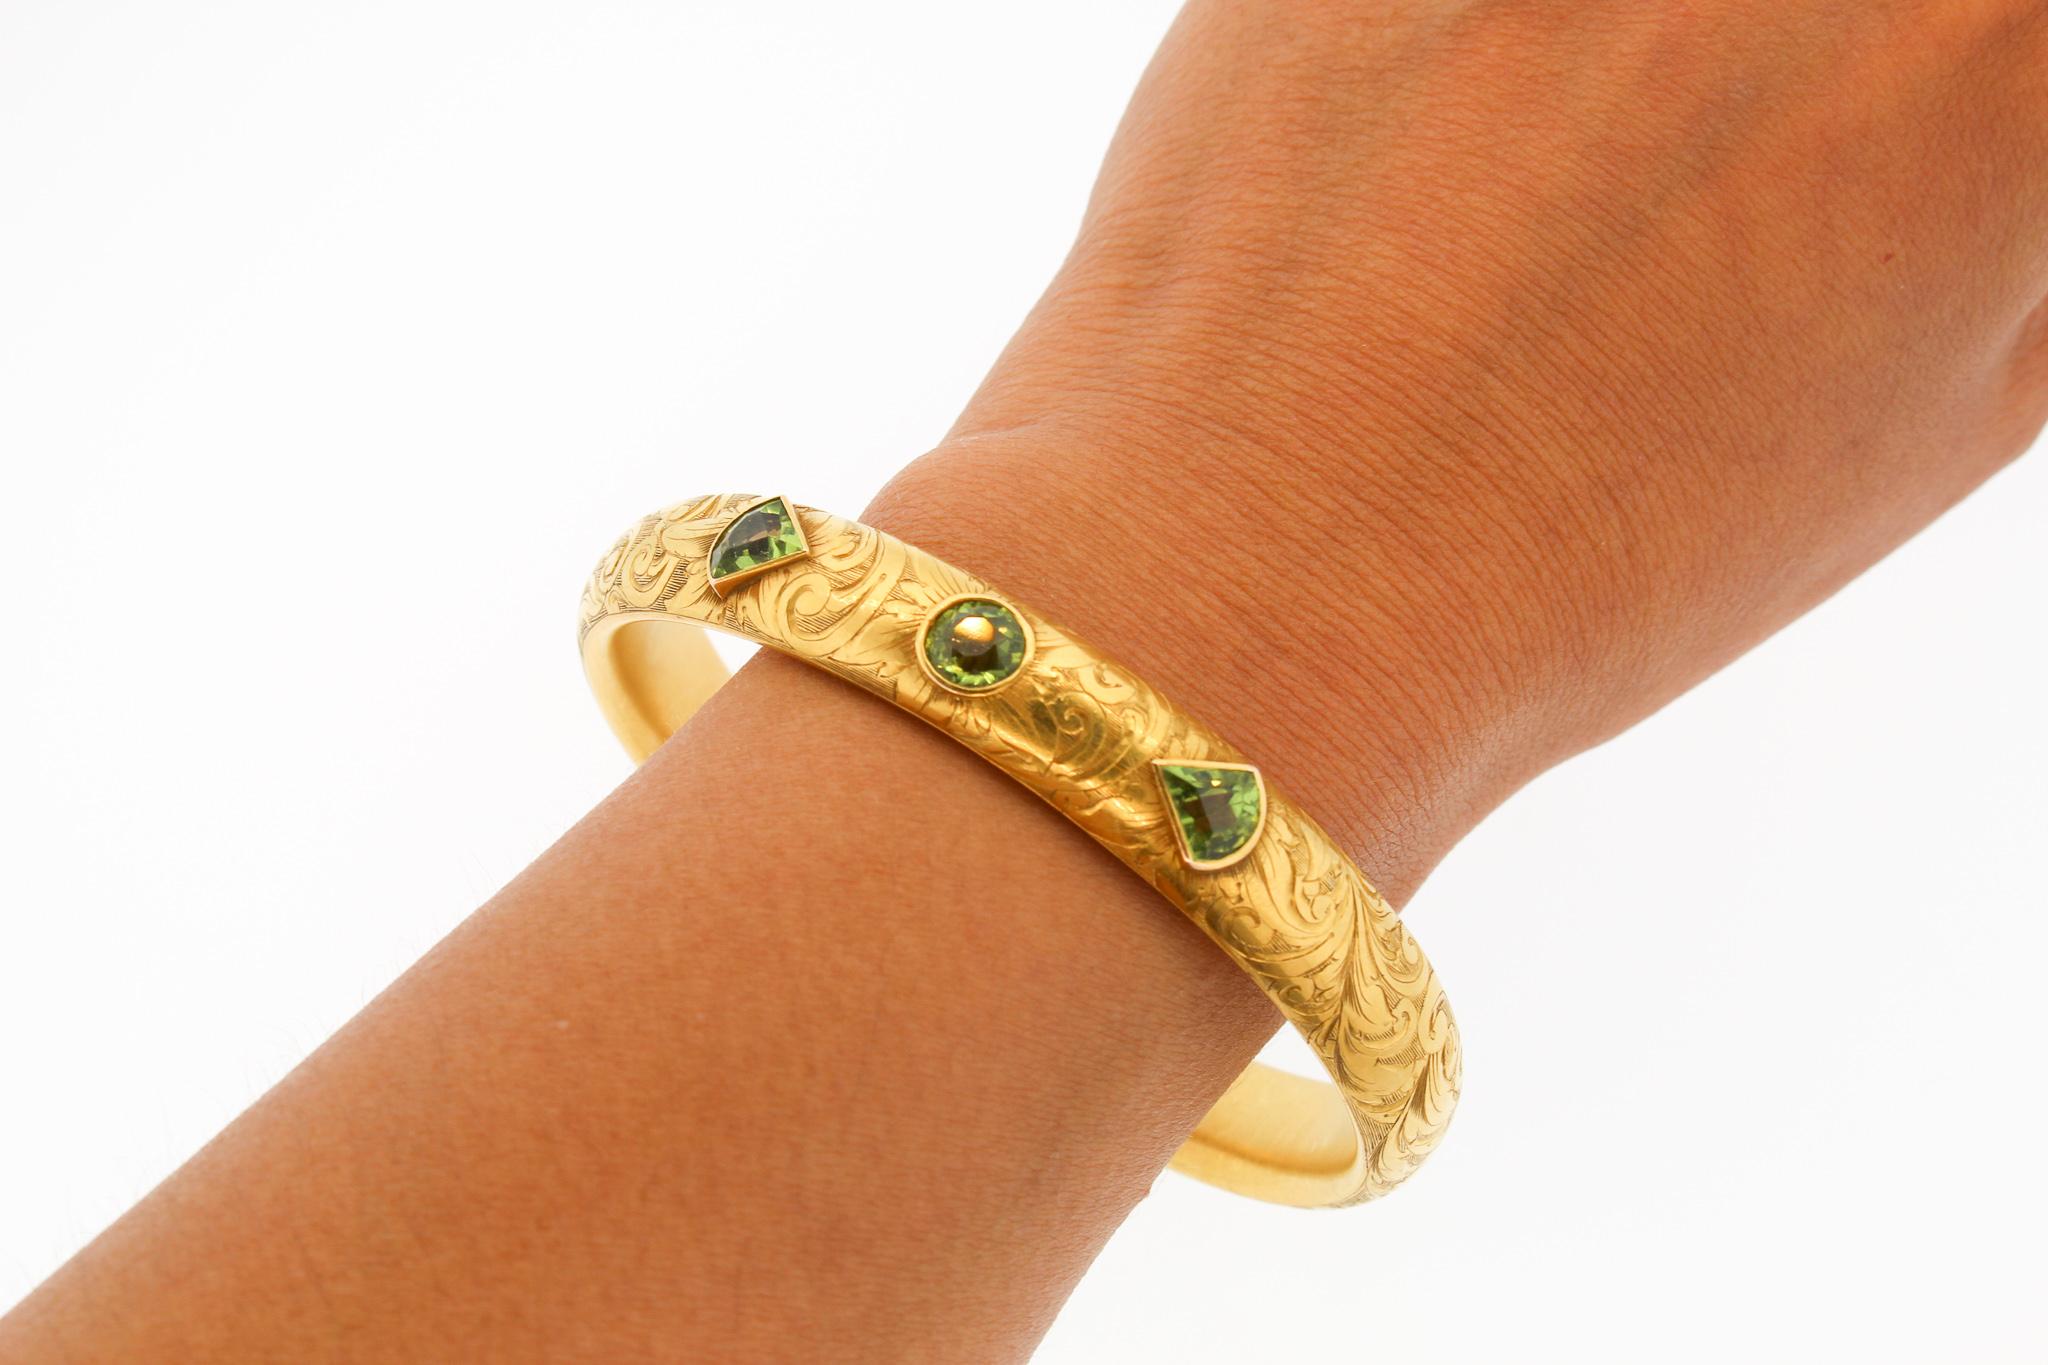 Art Nouveau engraved 14k gold hollow form bangle bracelet set with fancy shaped peridots. The bracelet is extra wide, about 0.40 inches wide, and set with two shield shaped peridot and one round shaped peridot. The bracelet is marked 14k and was